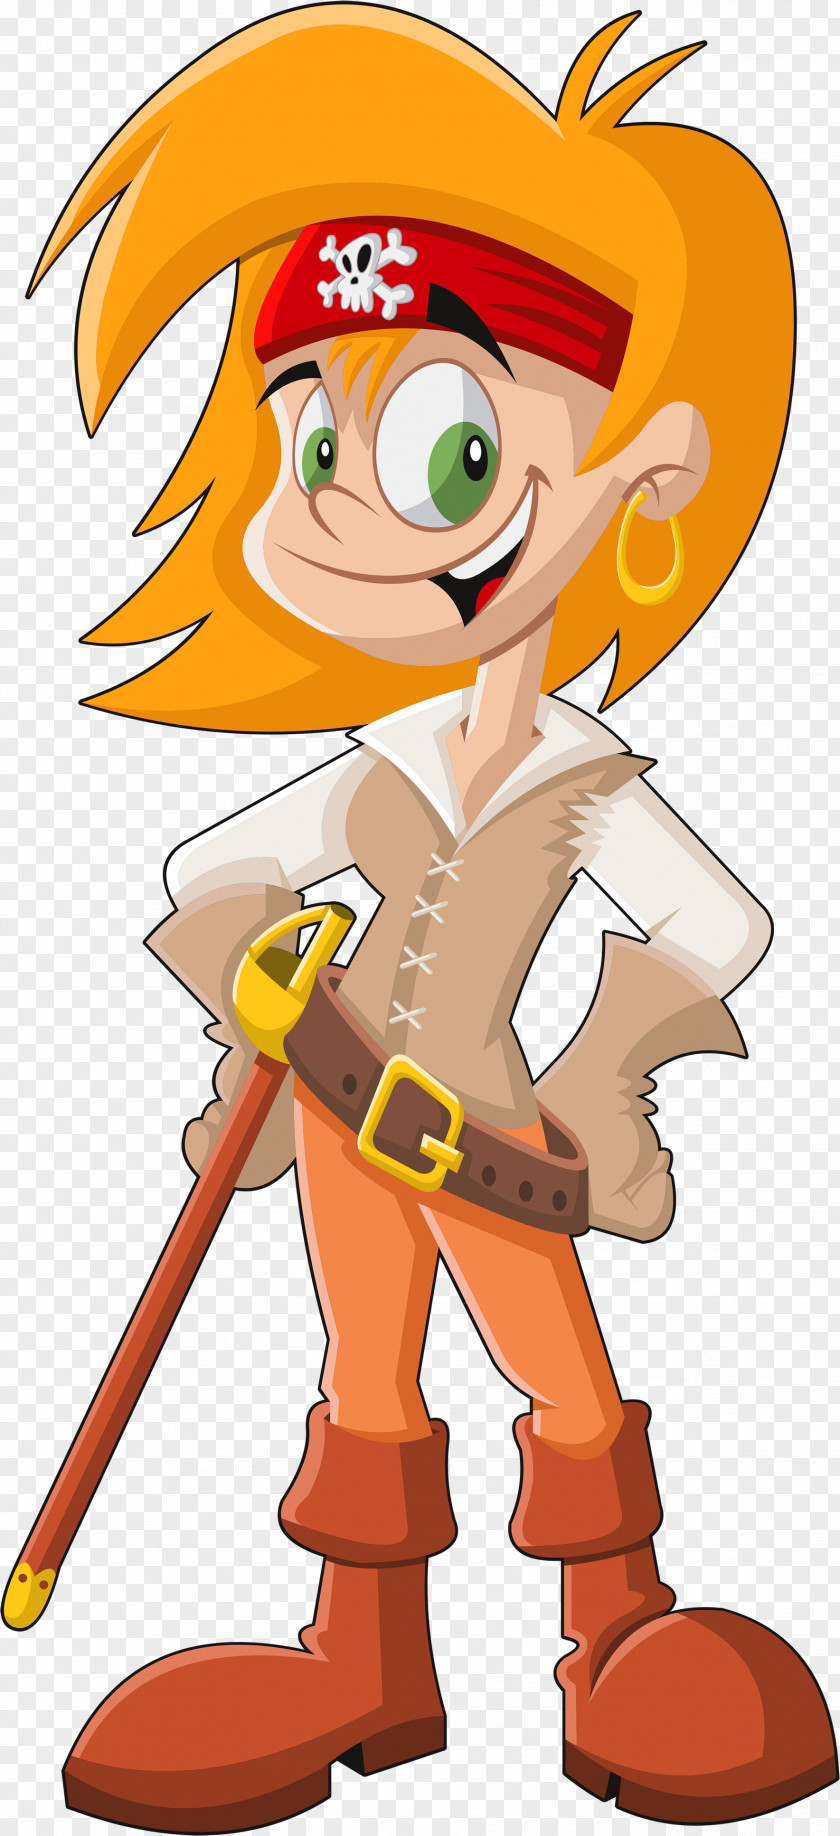 Pirate Drawing Piracy Clip Art PNG